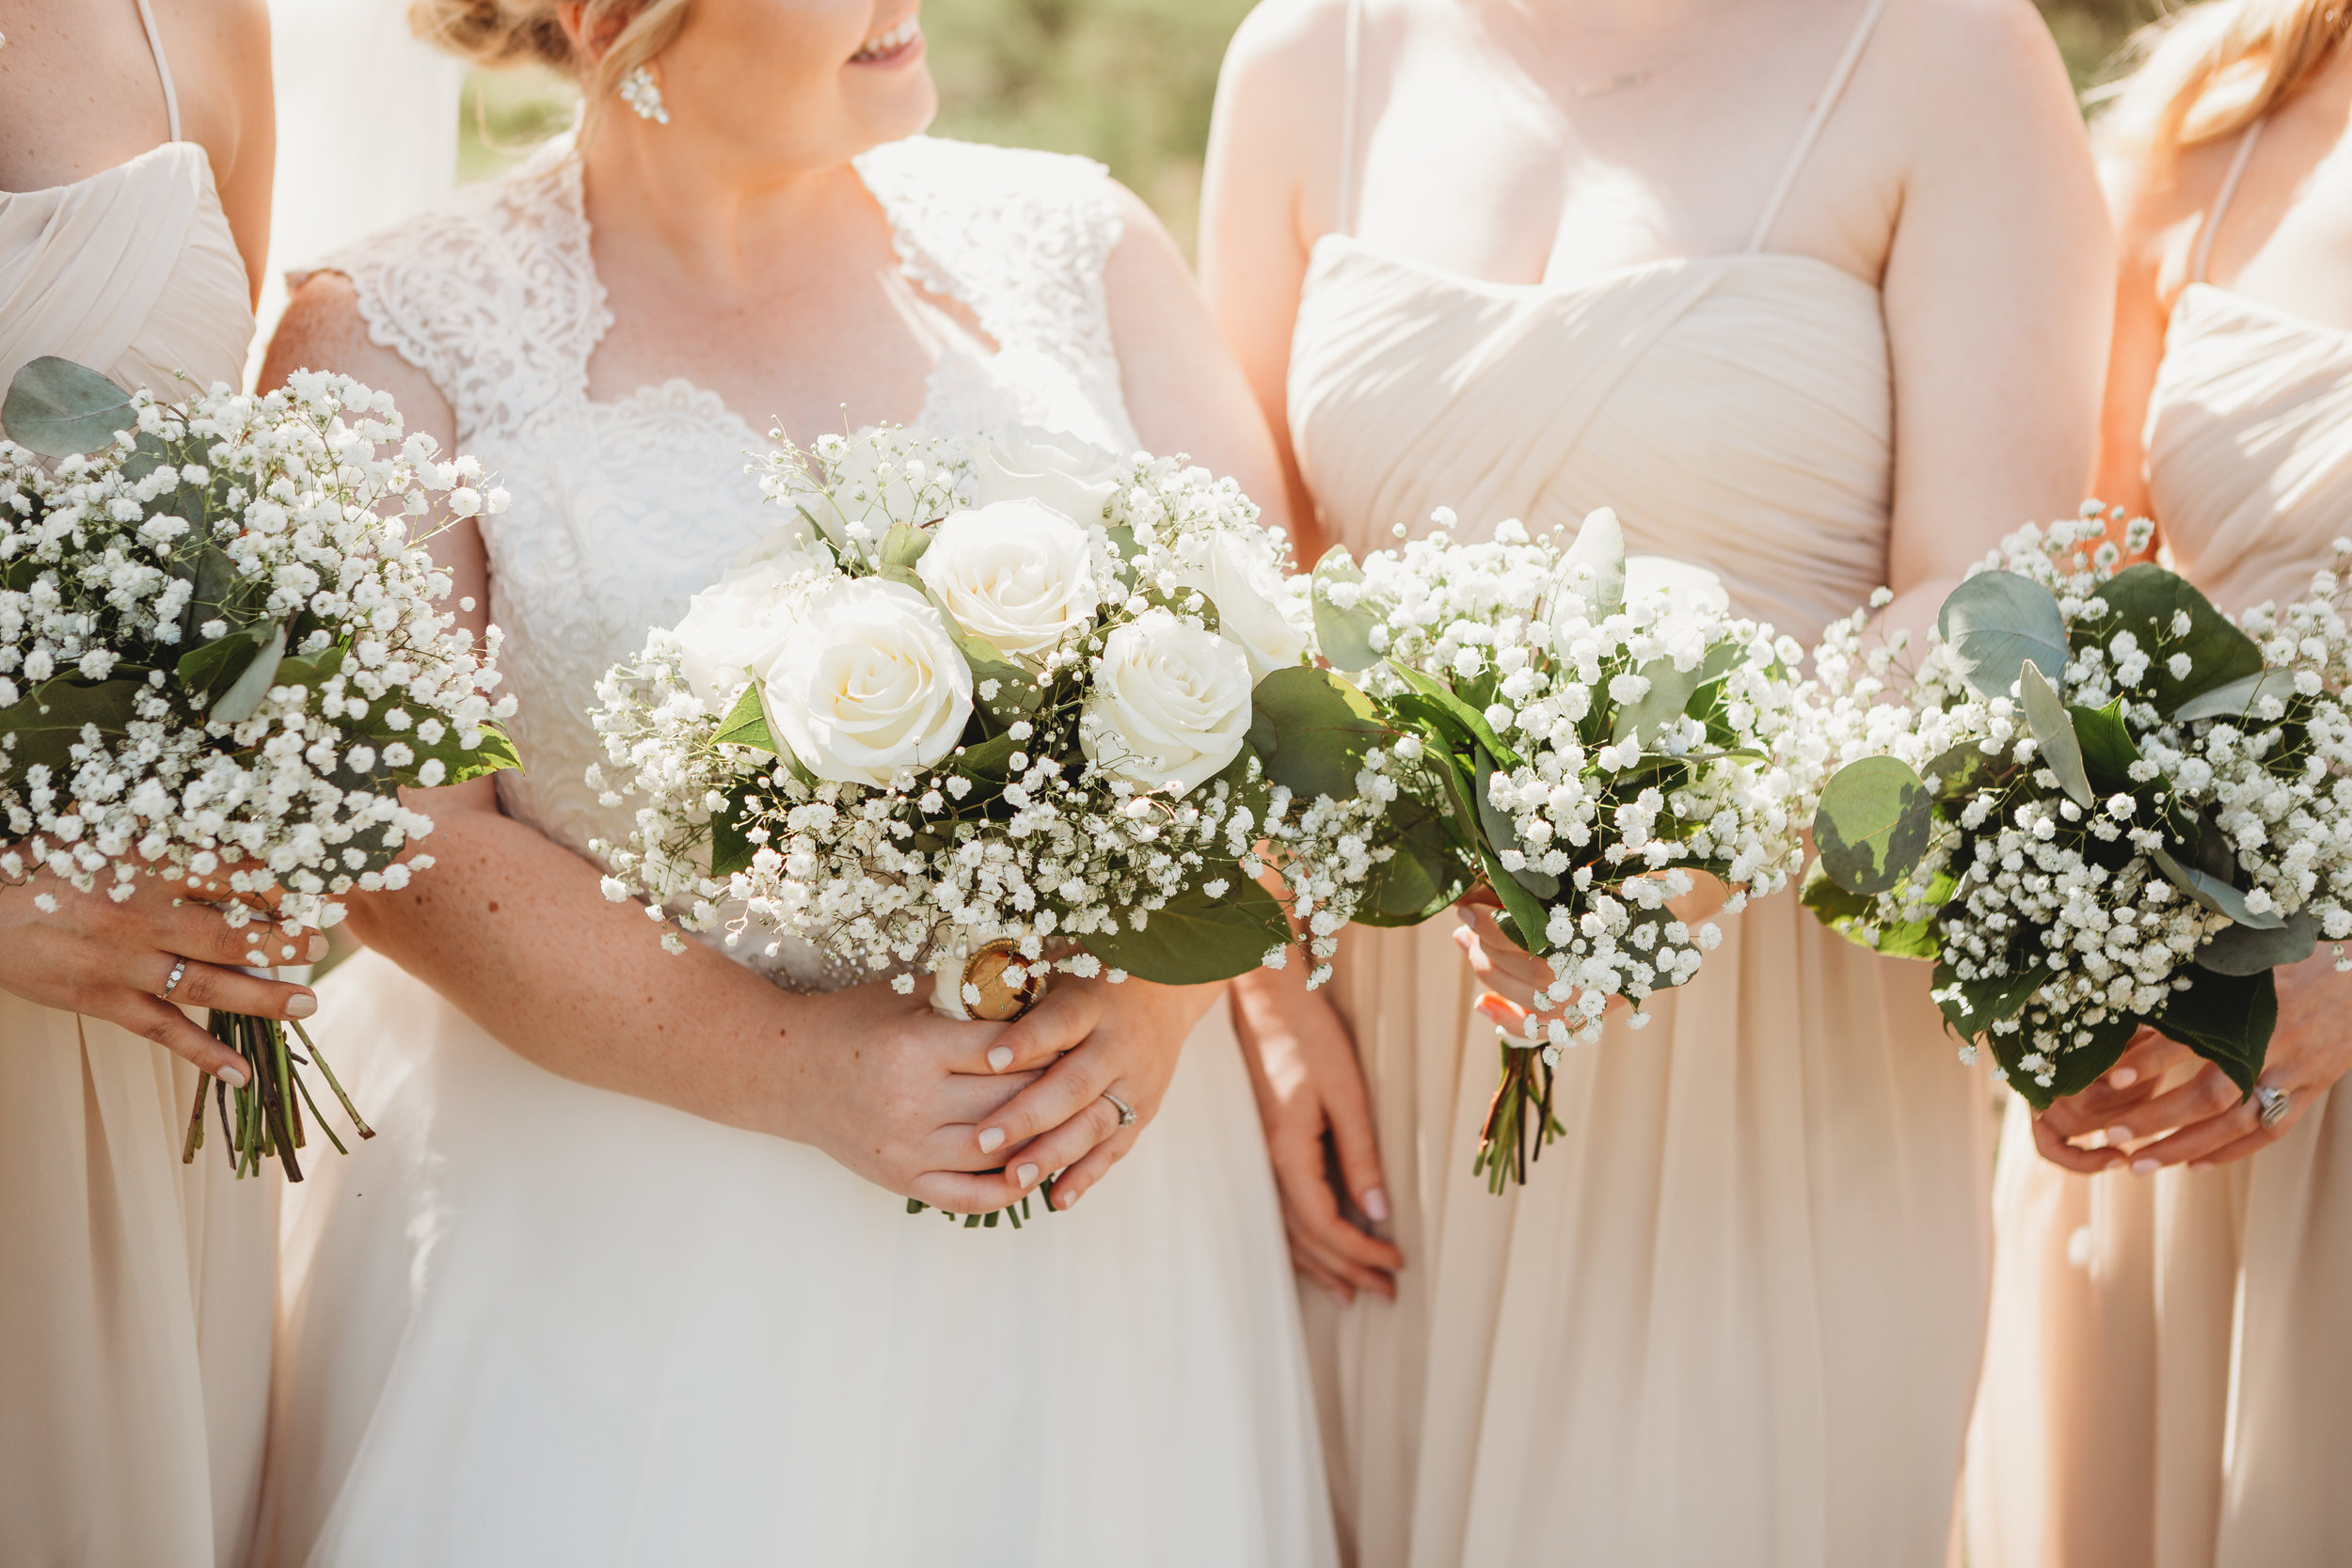  Details of the bride and her bridesmaids dresses with their bouquets #tealawardphotography #texasweddings #amarillophotographer #amarilloweddingphotographer #emotionalphotography #intimateweddingphotography #weddingday #weddingphotos #texasphotographer #inspiredwedding #intimatewedding #weddingformals #bigday #portraits 